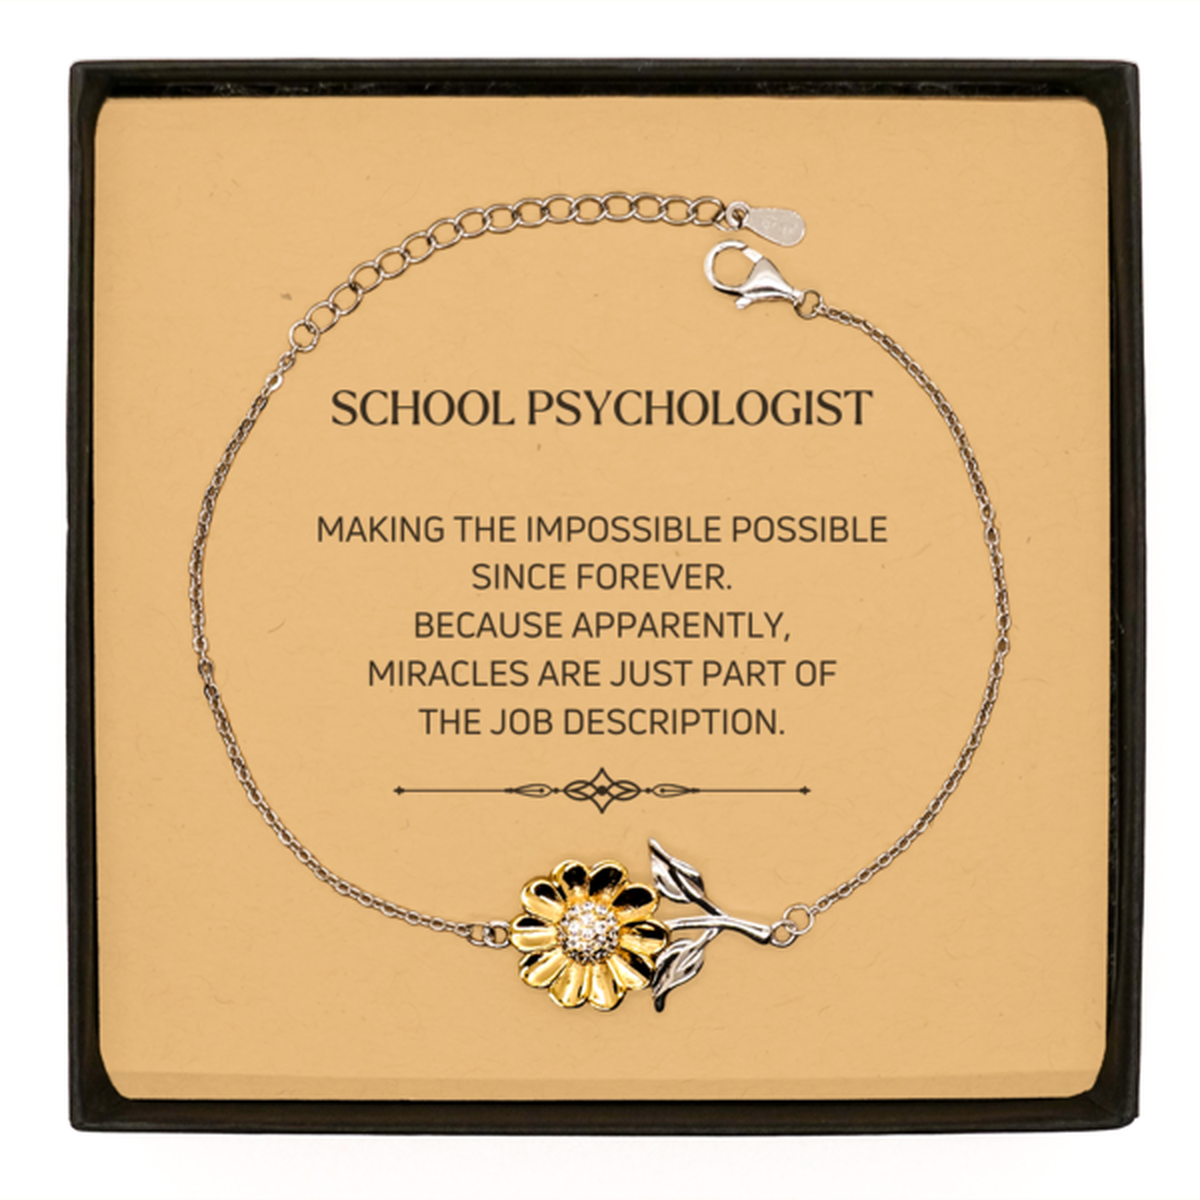 Funny School Psychologist Gifts, Miracles are just part of the job description, Inspirational Birthday Sunflower Bracelet For School Psychologist, Men, Women, Coworkers, Friends, Boss